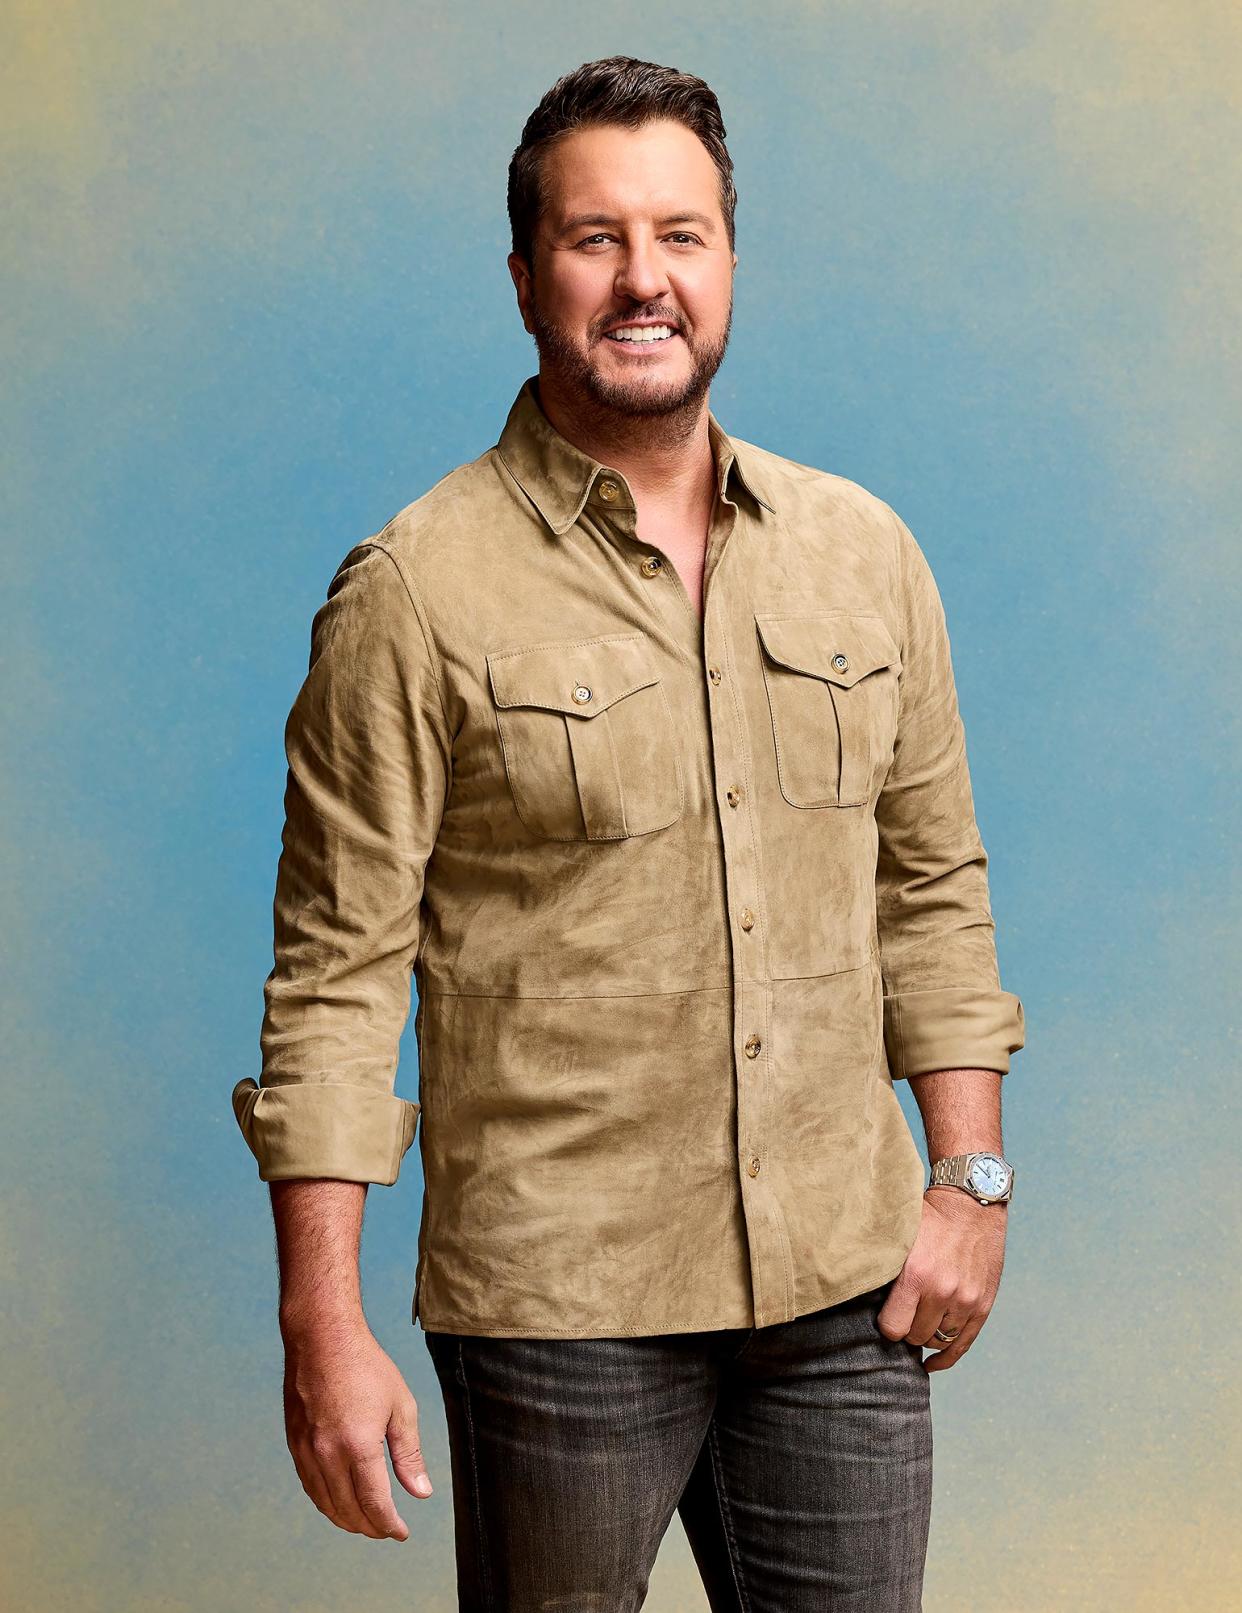 Why Luke Bryan Was Using an IV During ‘American Idol’ Auditions